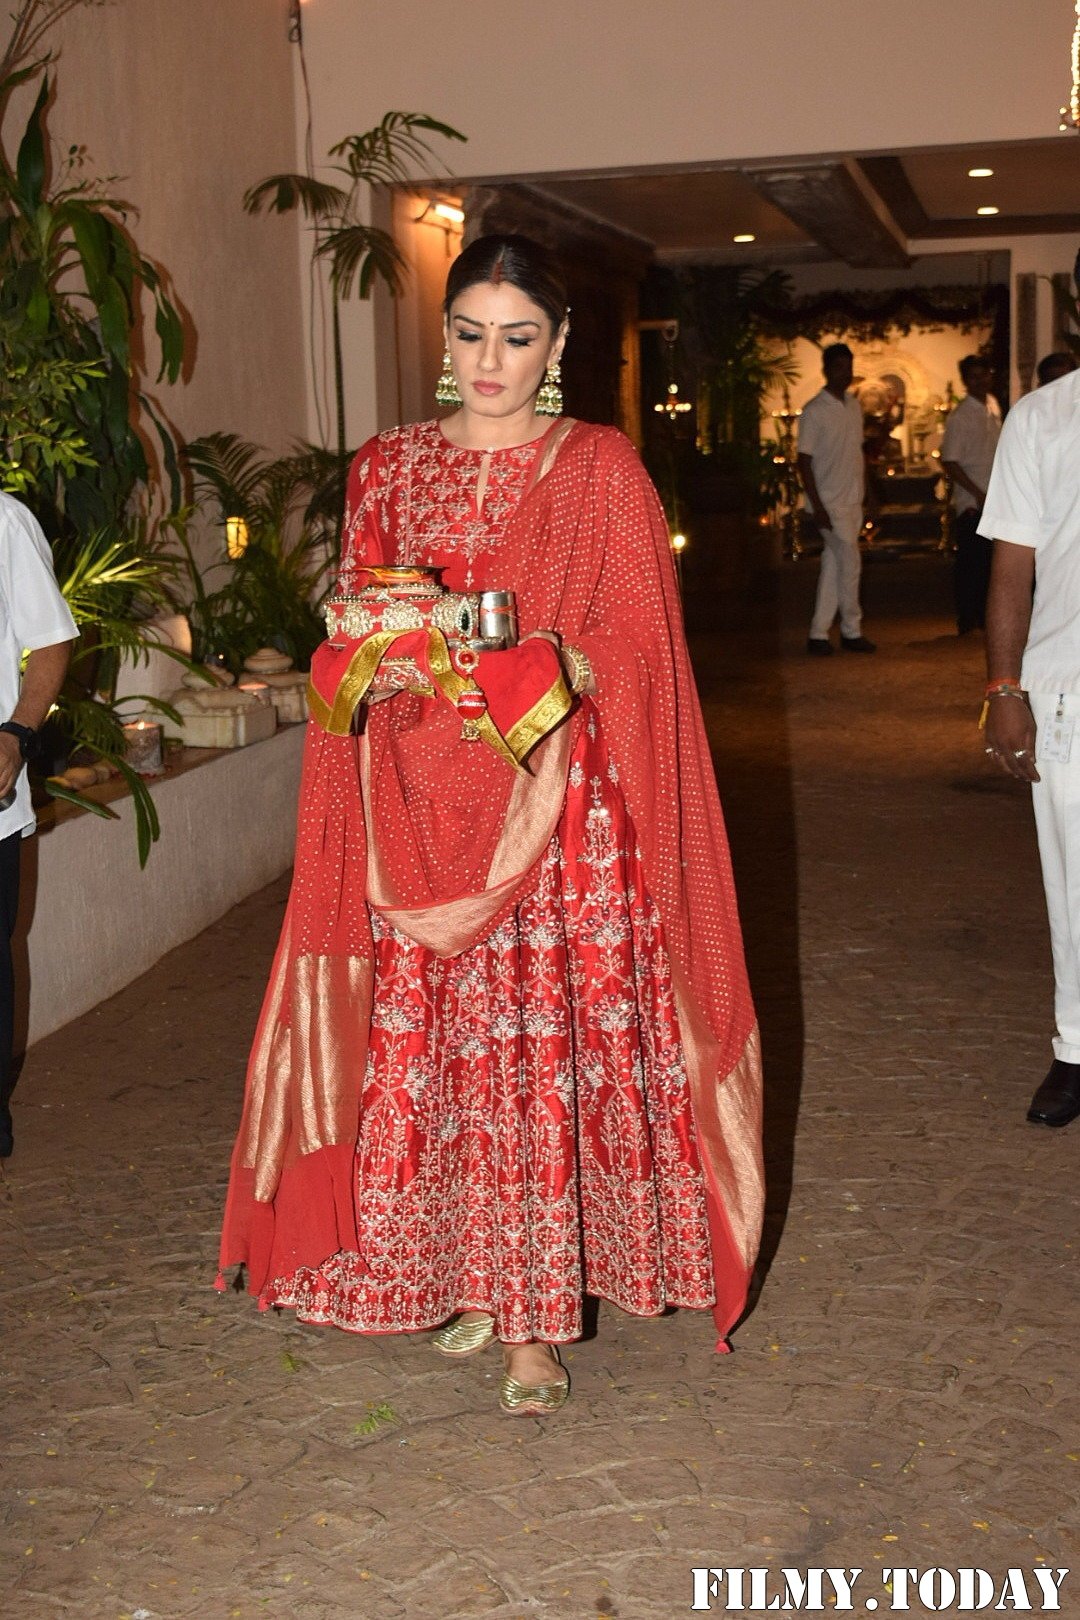 Raveena Tandon - Photos: Celebs At Celebration Of Karvachauth At Anil Kapoor's House | Picture 1692567